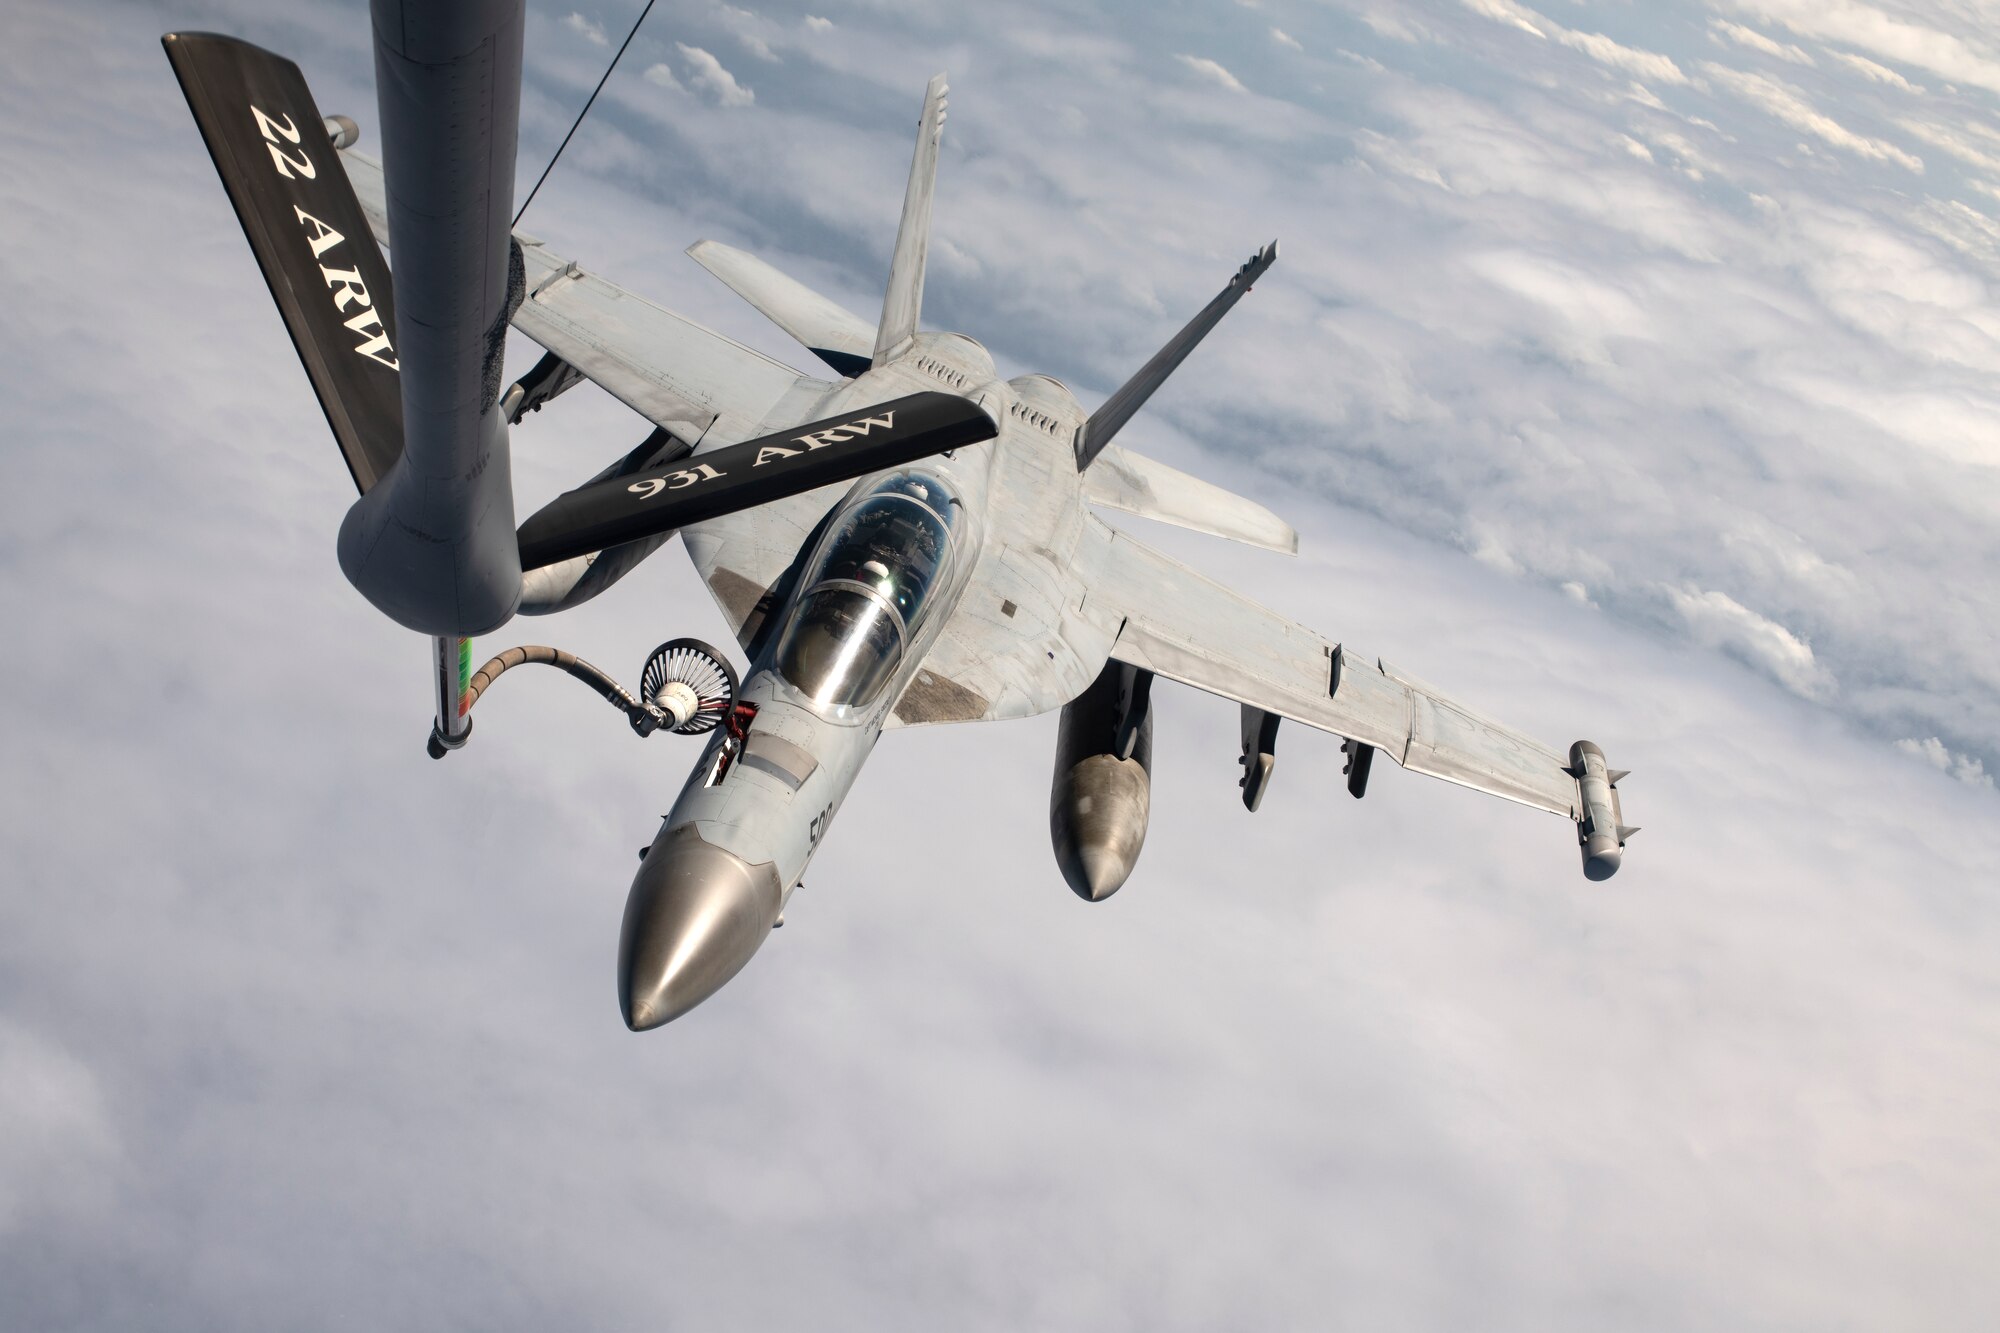 A U.S. Navy F/A-18 Super Hornet receives fuel from a KC-135 Stratotanker assigned to the 909th Air Refueling Squadron during a joint training exercise over the Pacific Ocean, Oct. 24, 2022. During the drogue-and-probe refueling method, a retractable probe from the receiving aircraft connects with the drogue, which trails behind the tanker aircraft via a hose attached to the flying boom. (U.S. Air Force photo by Senior Airman Jessi Roth)